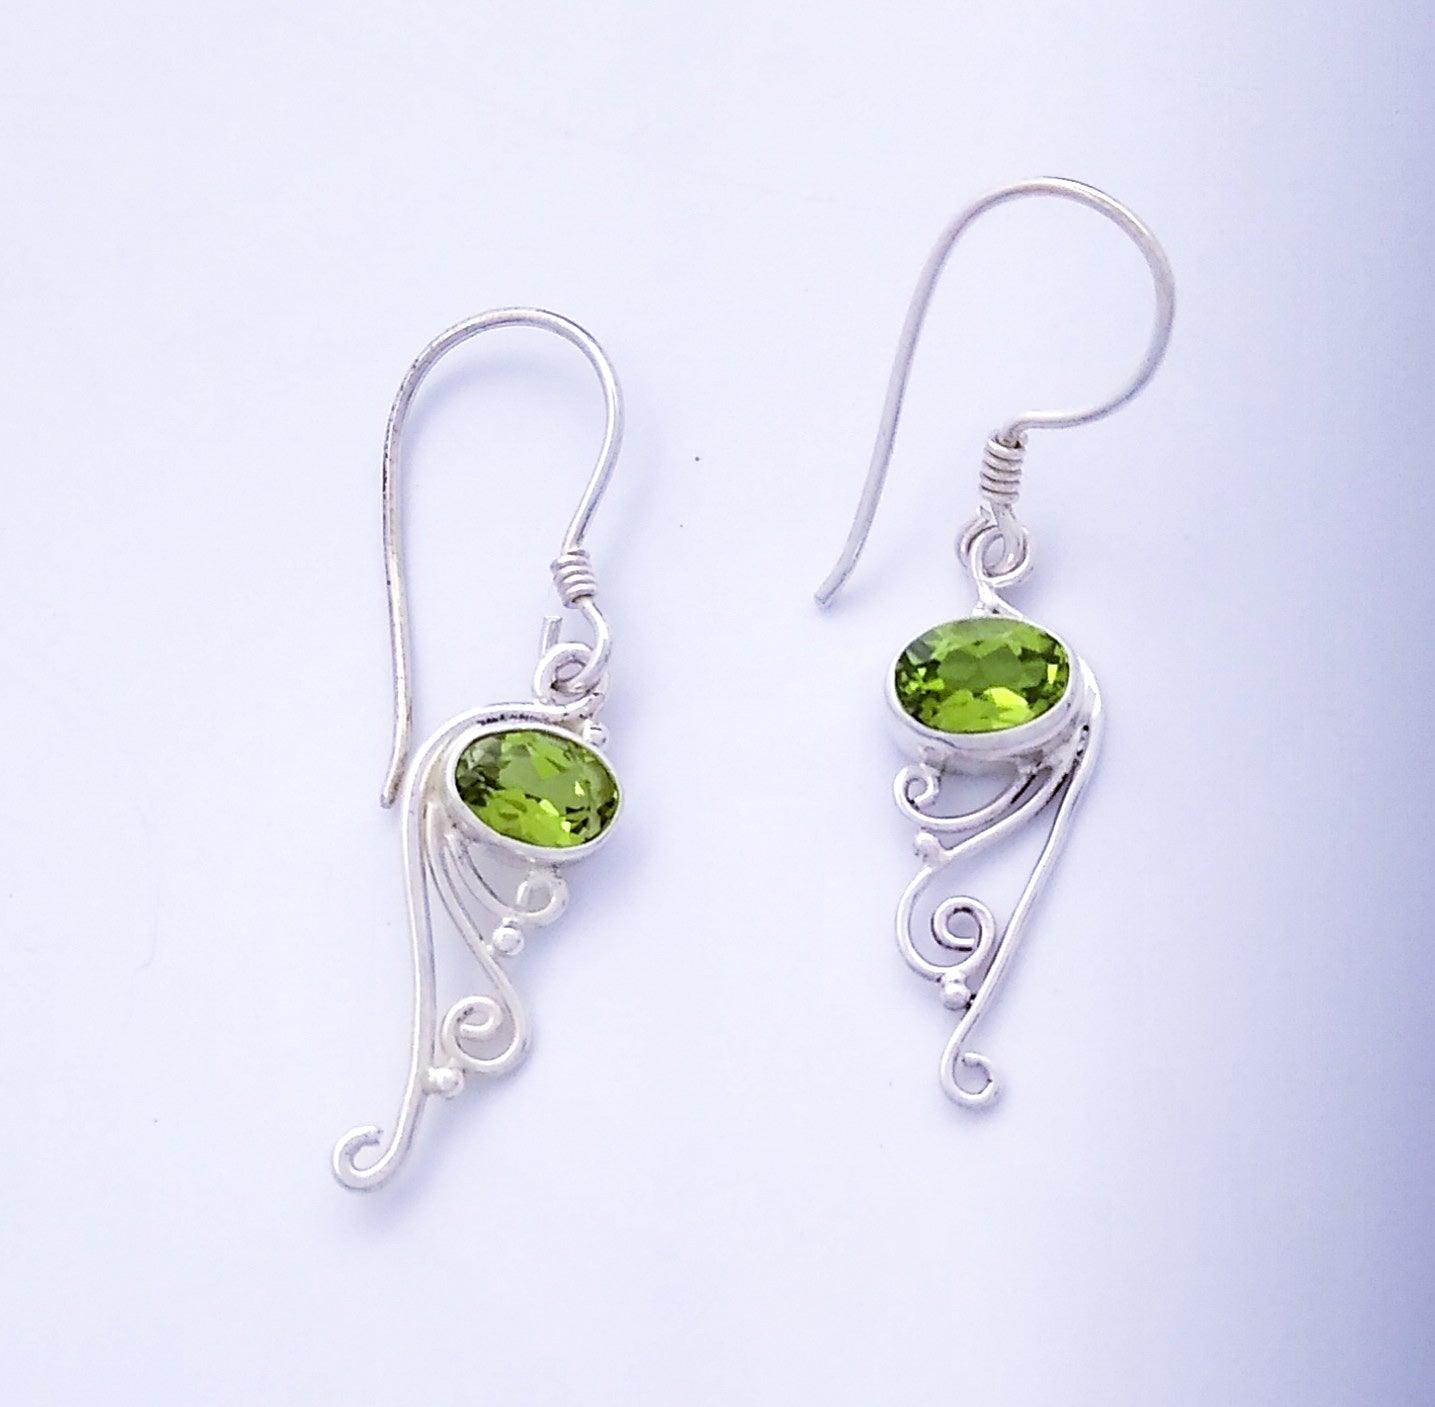 Sterling silver drop earrings on a French wire with an Peridot stone at the top and filigree design at the bottom.